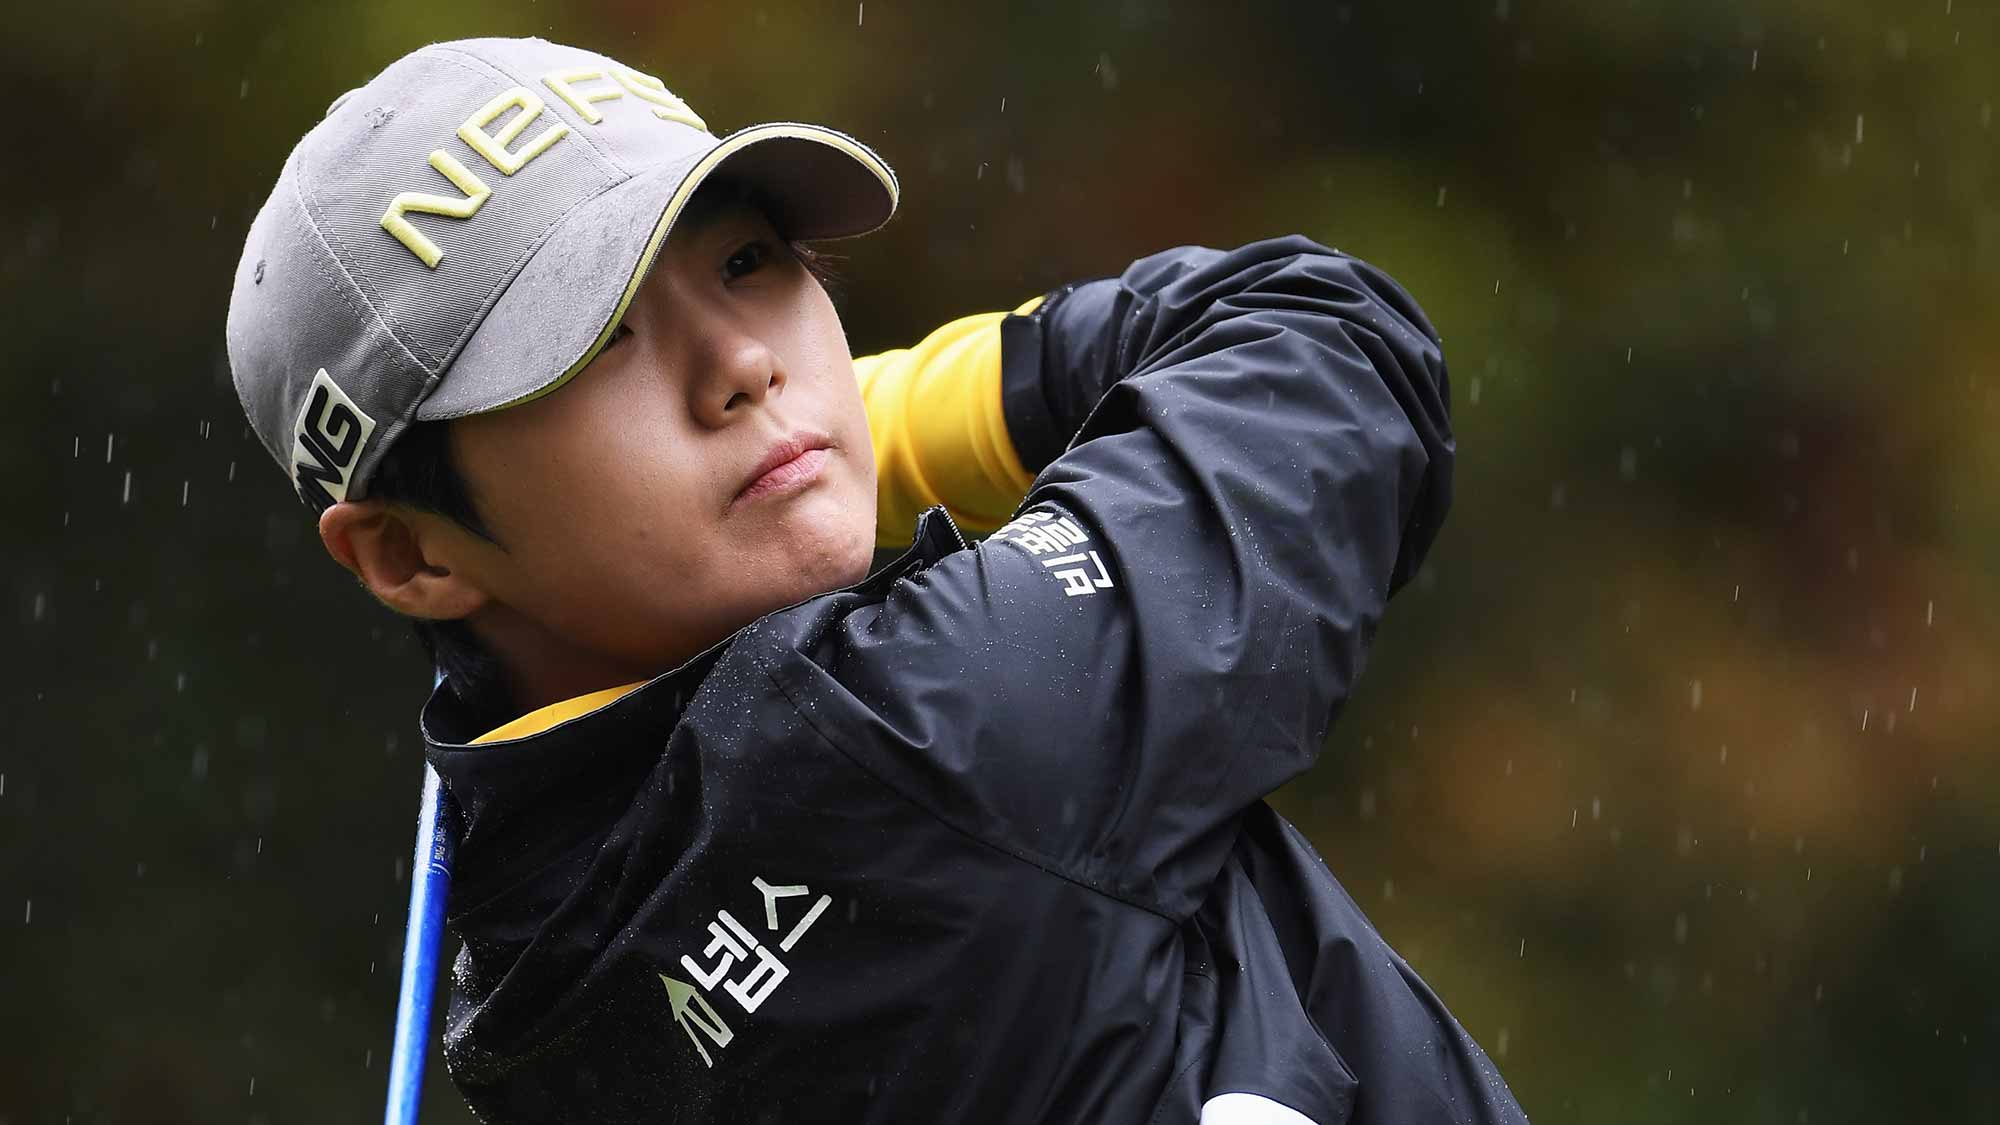 Sung Hyun Park of Korea plays a shot during the final round of The Evian Championship